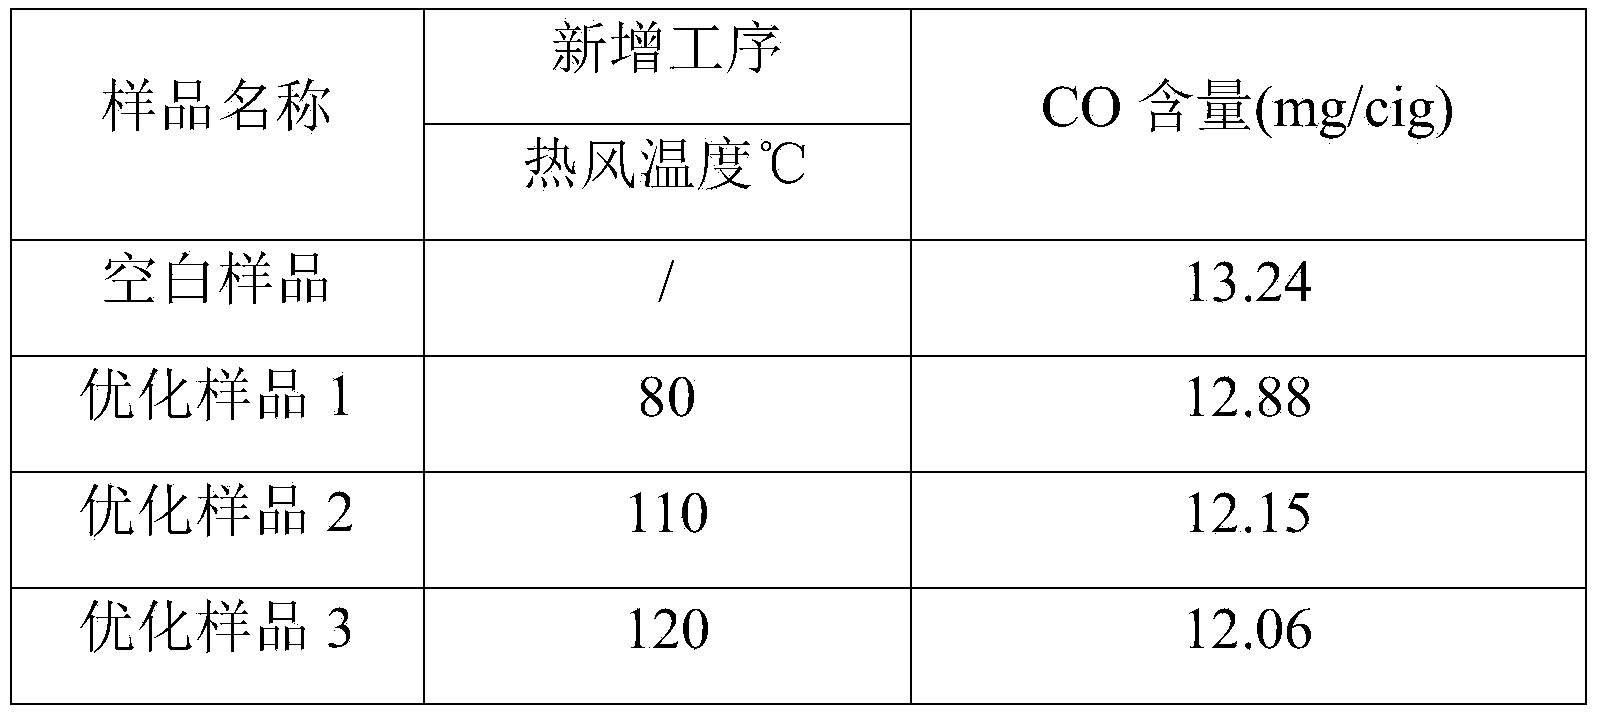 Threshing and redrying method for reducing CO release amount